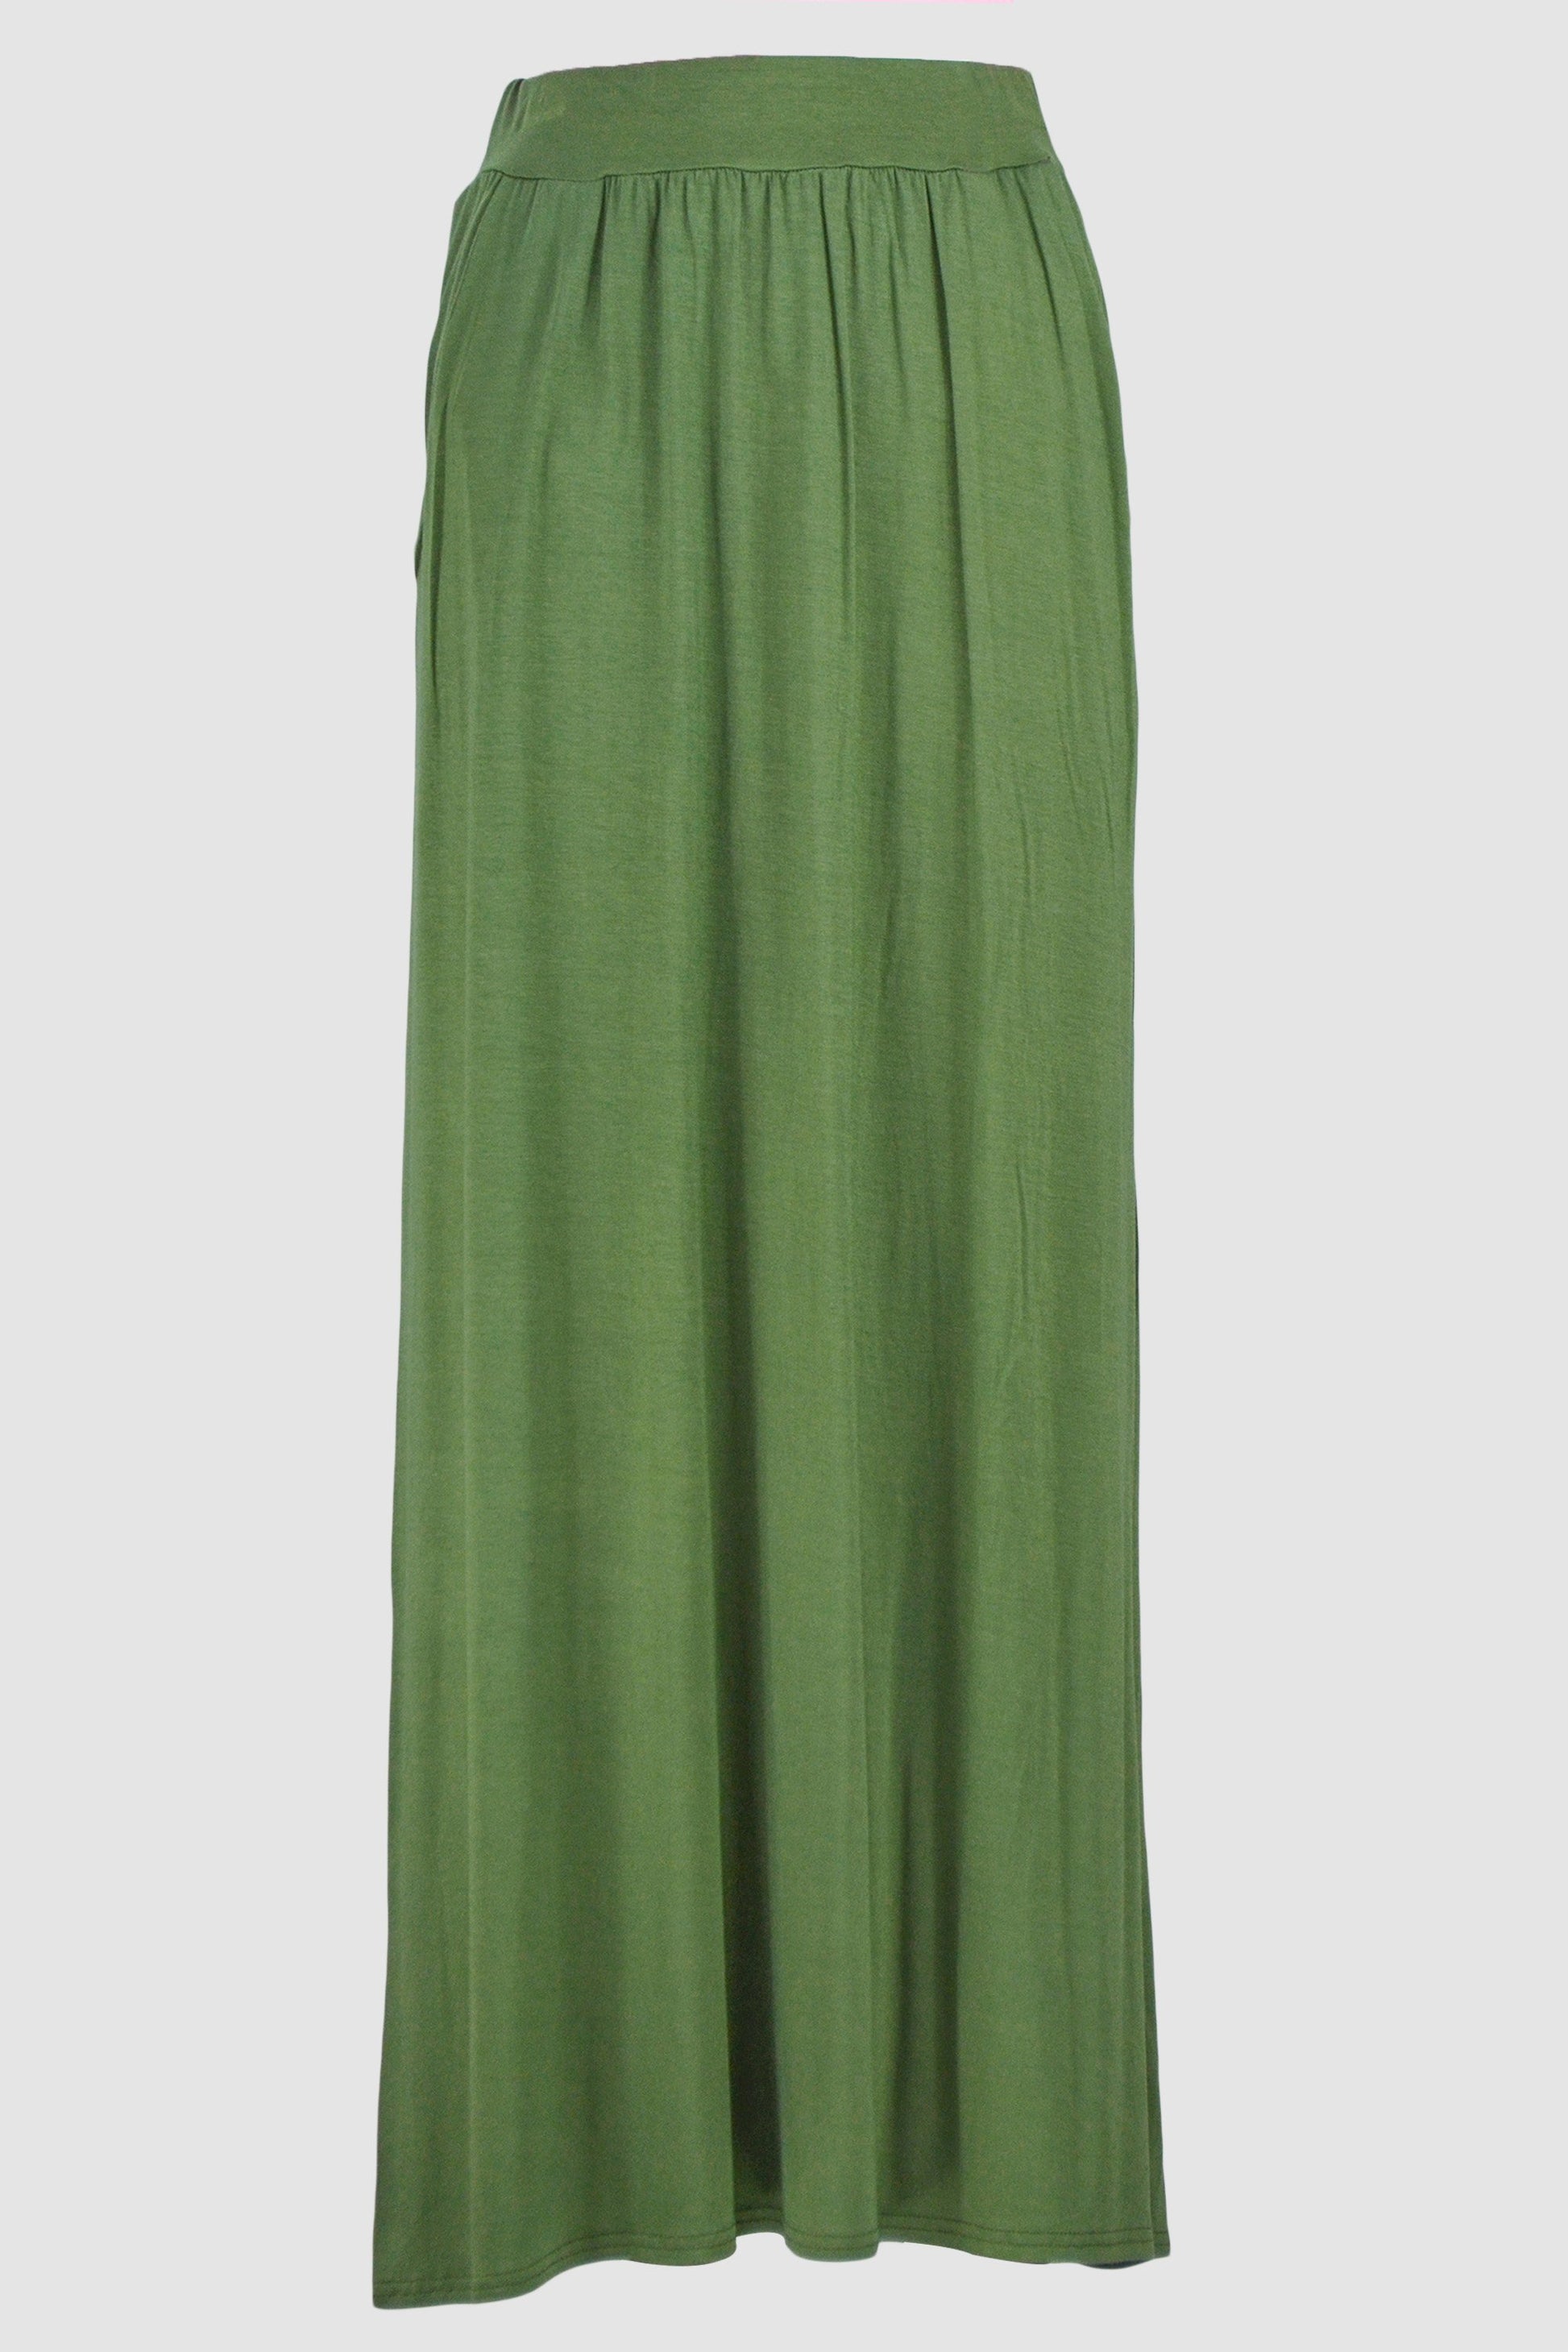 Green Jersey Skirt With Pockets - Smile Europe Wholesale 